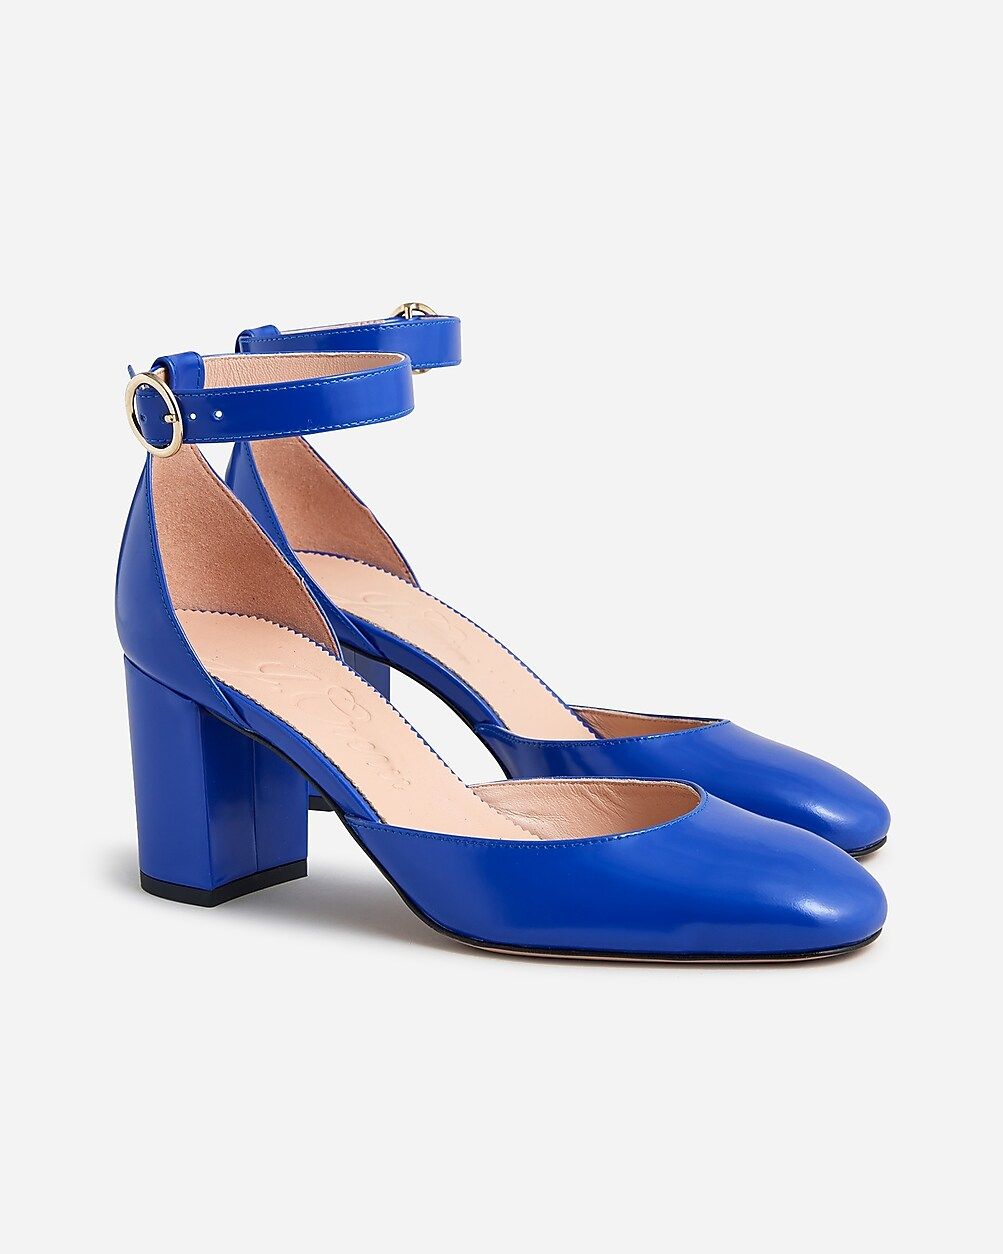 Maise ankle-strap heels in leather | J.Crew US